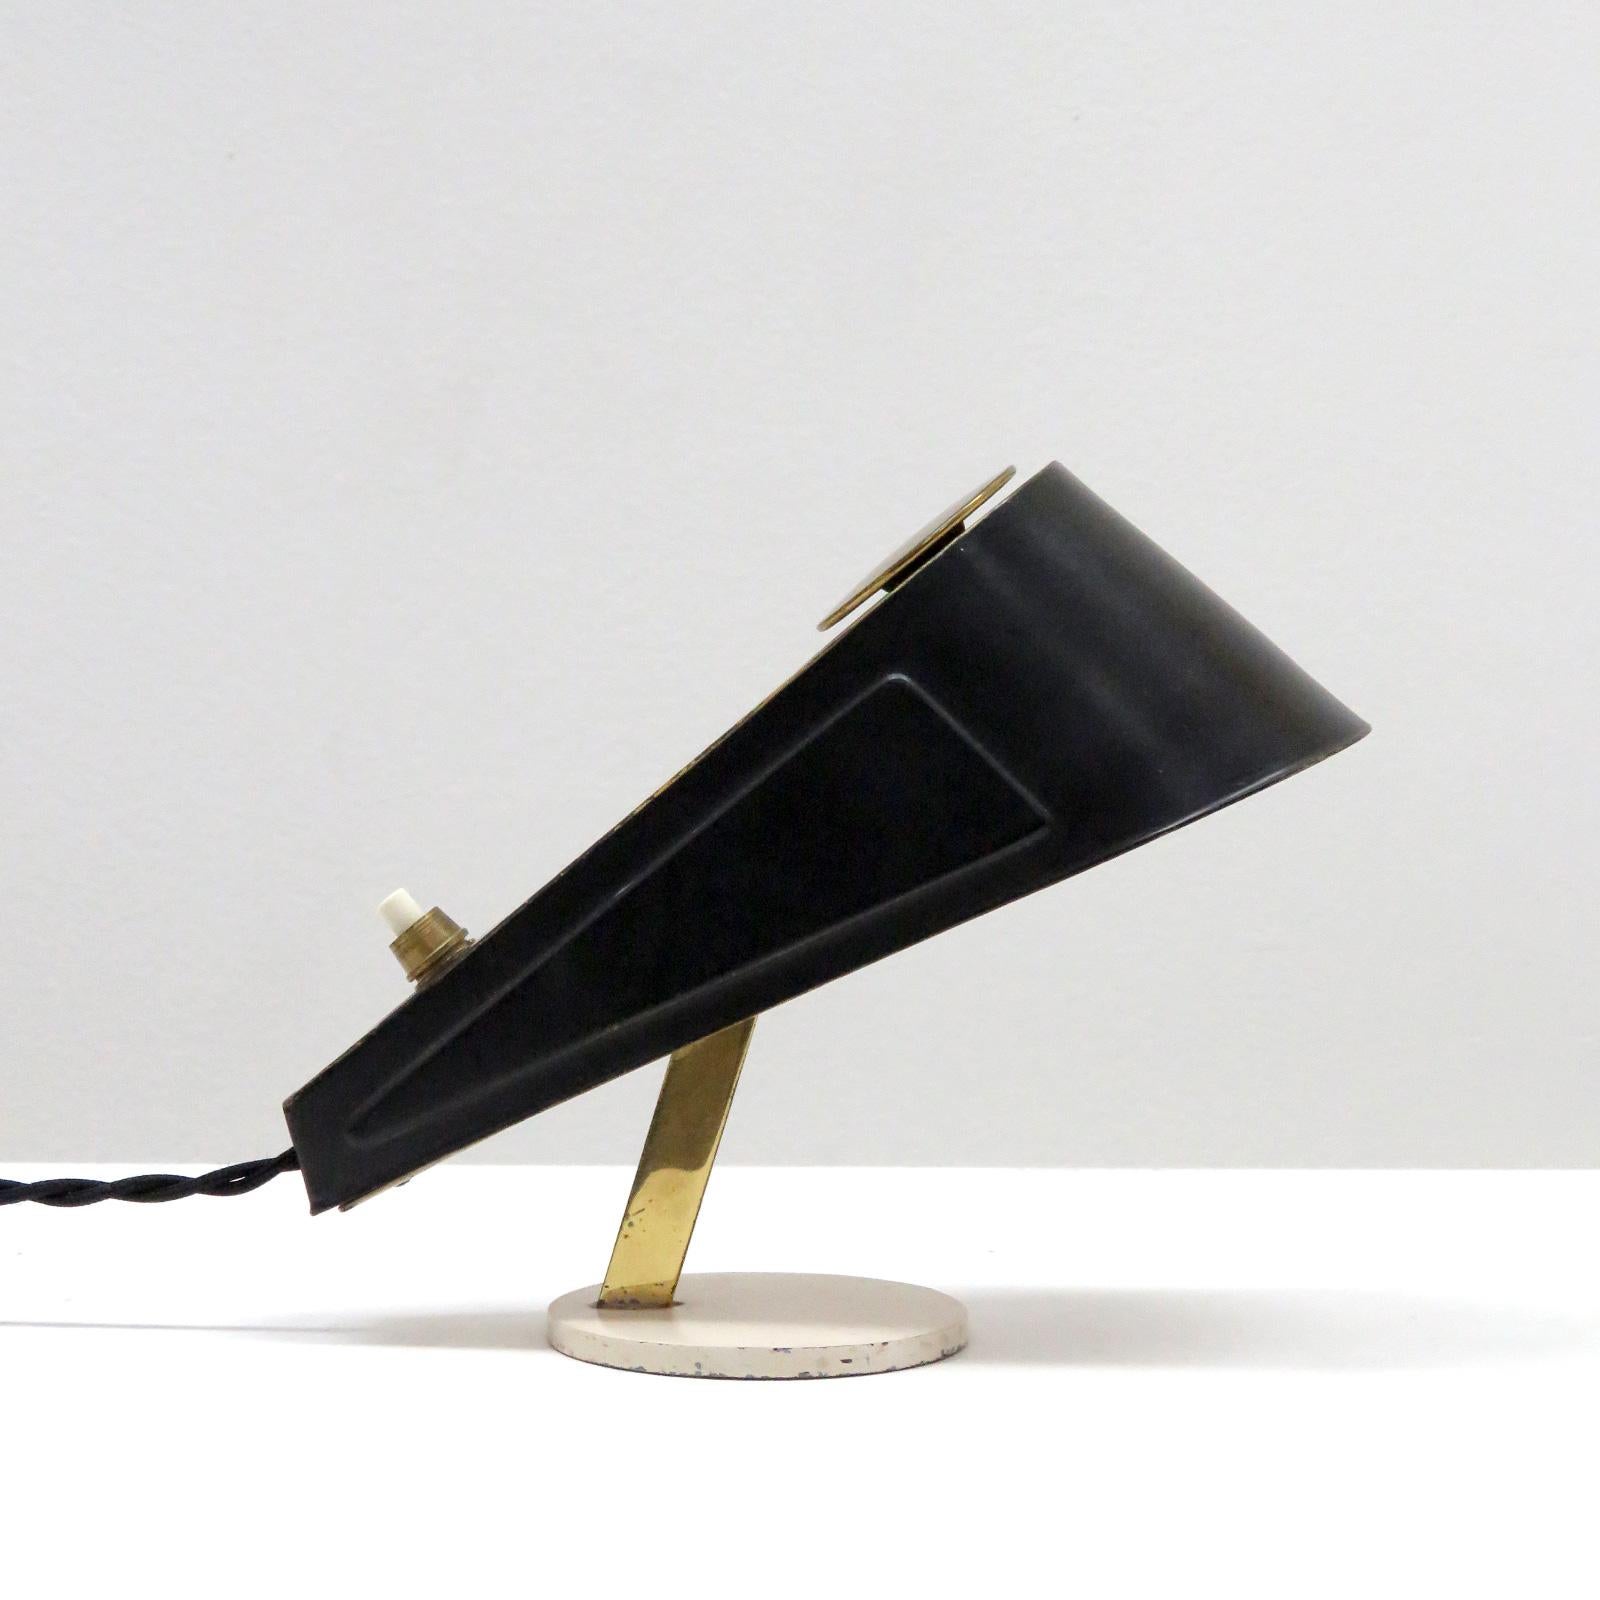 Unique petite Italian table lamp from the 1960s in brass and black and off-white enameled metal, on/off switch at rear of the adjustable body.